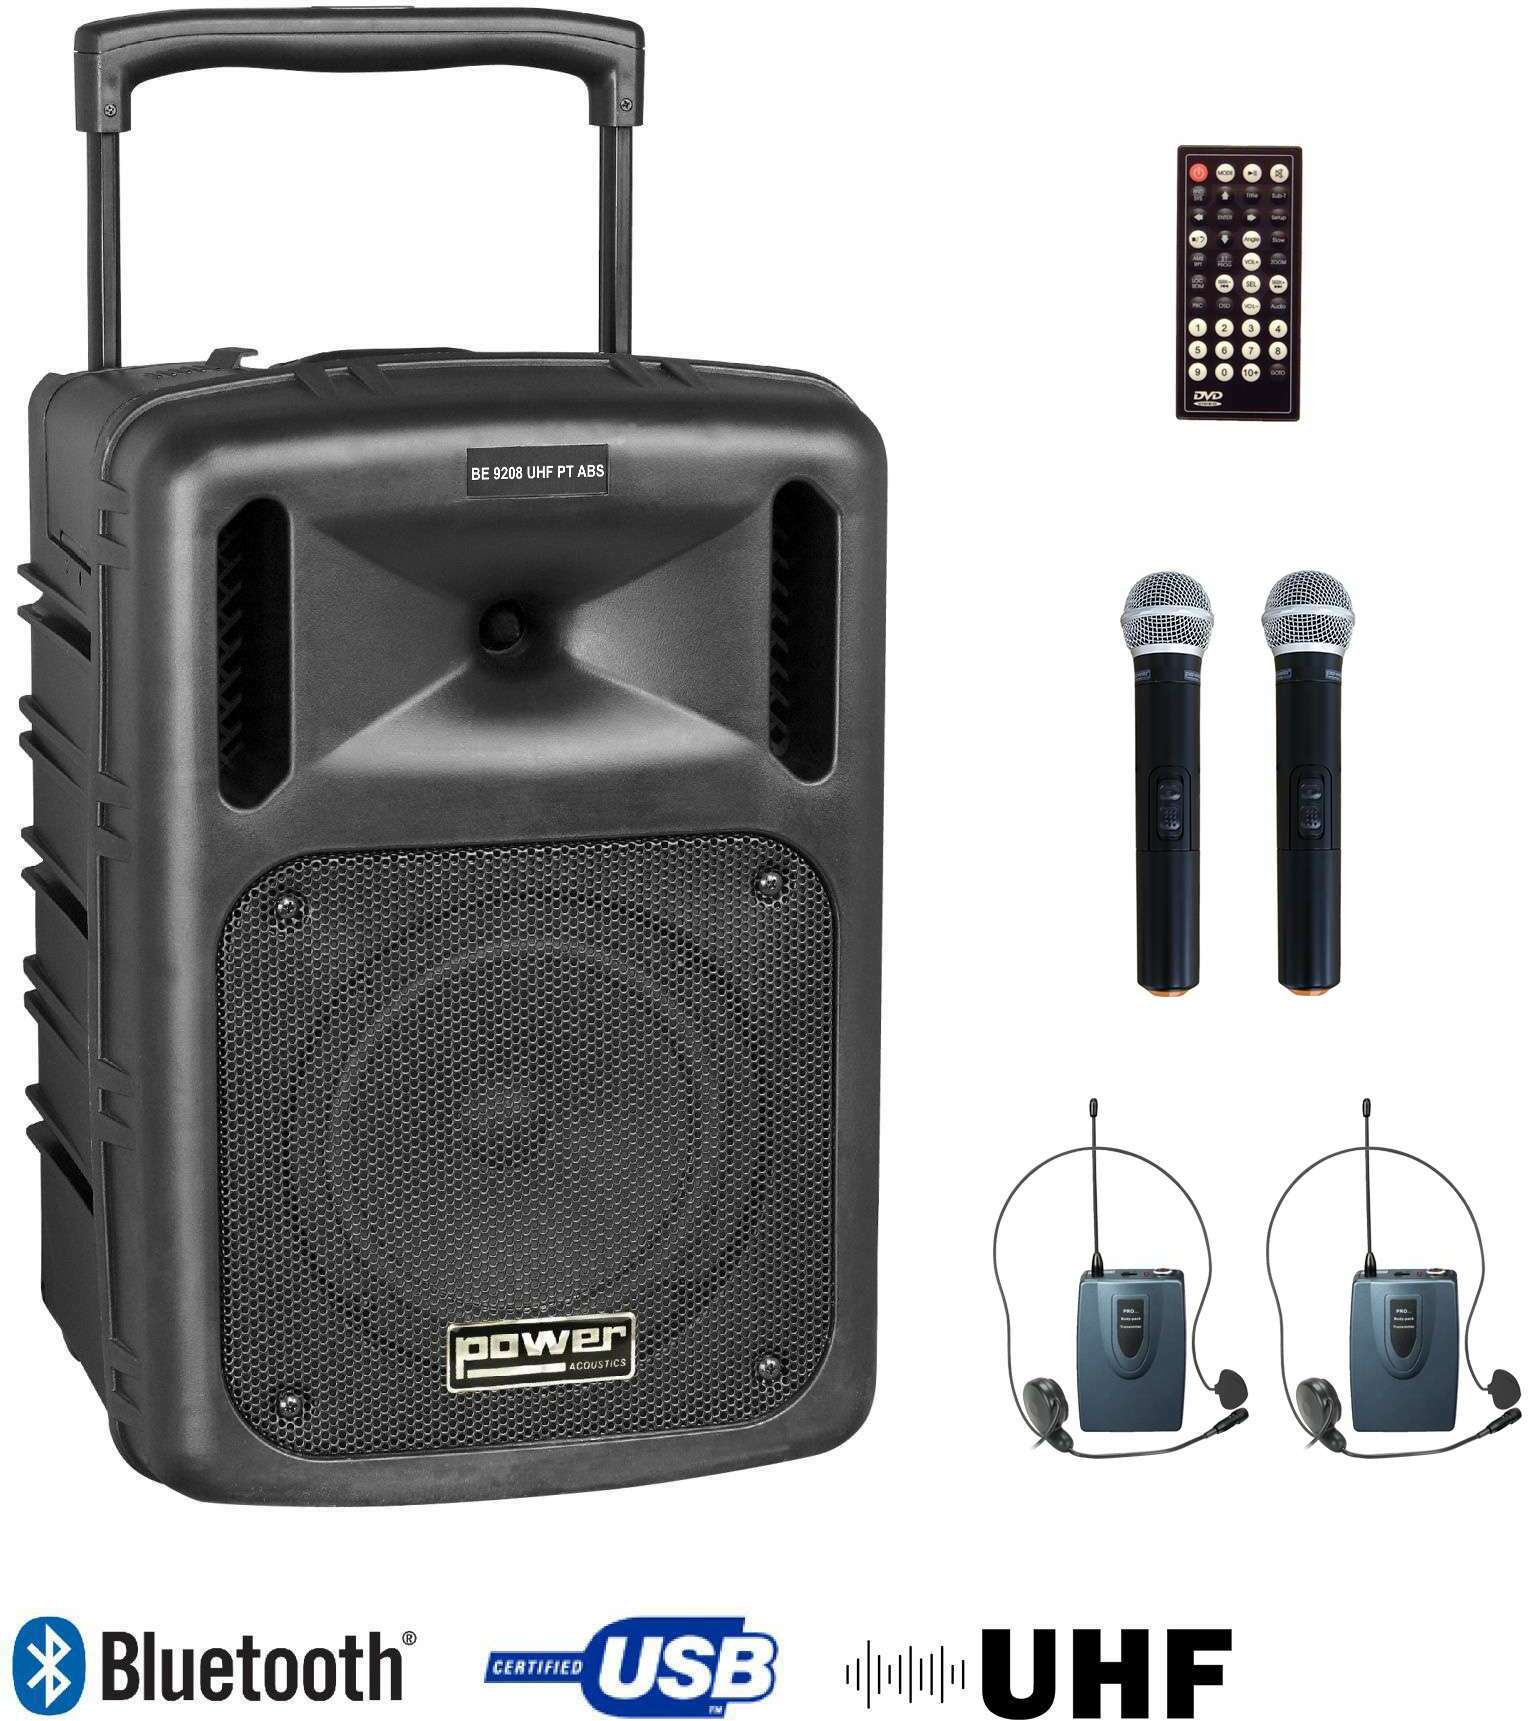 Power Acoustics Be 9208 Uhf Pt Abs - Portable PA system - Main picture